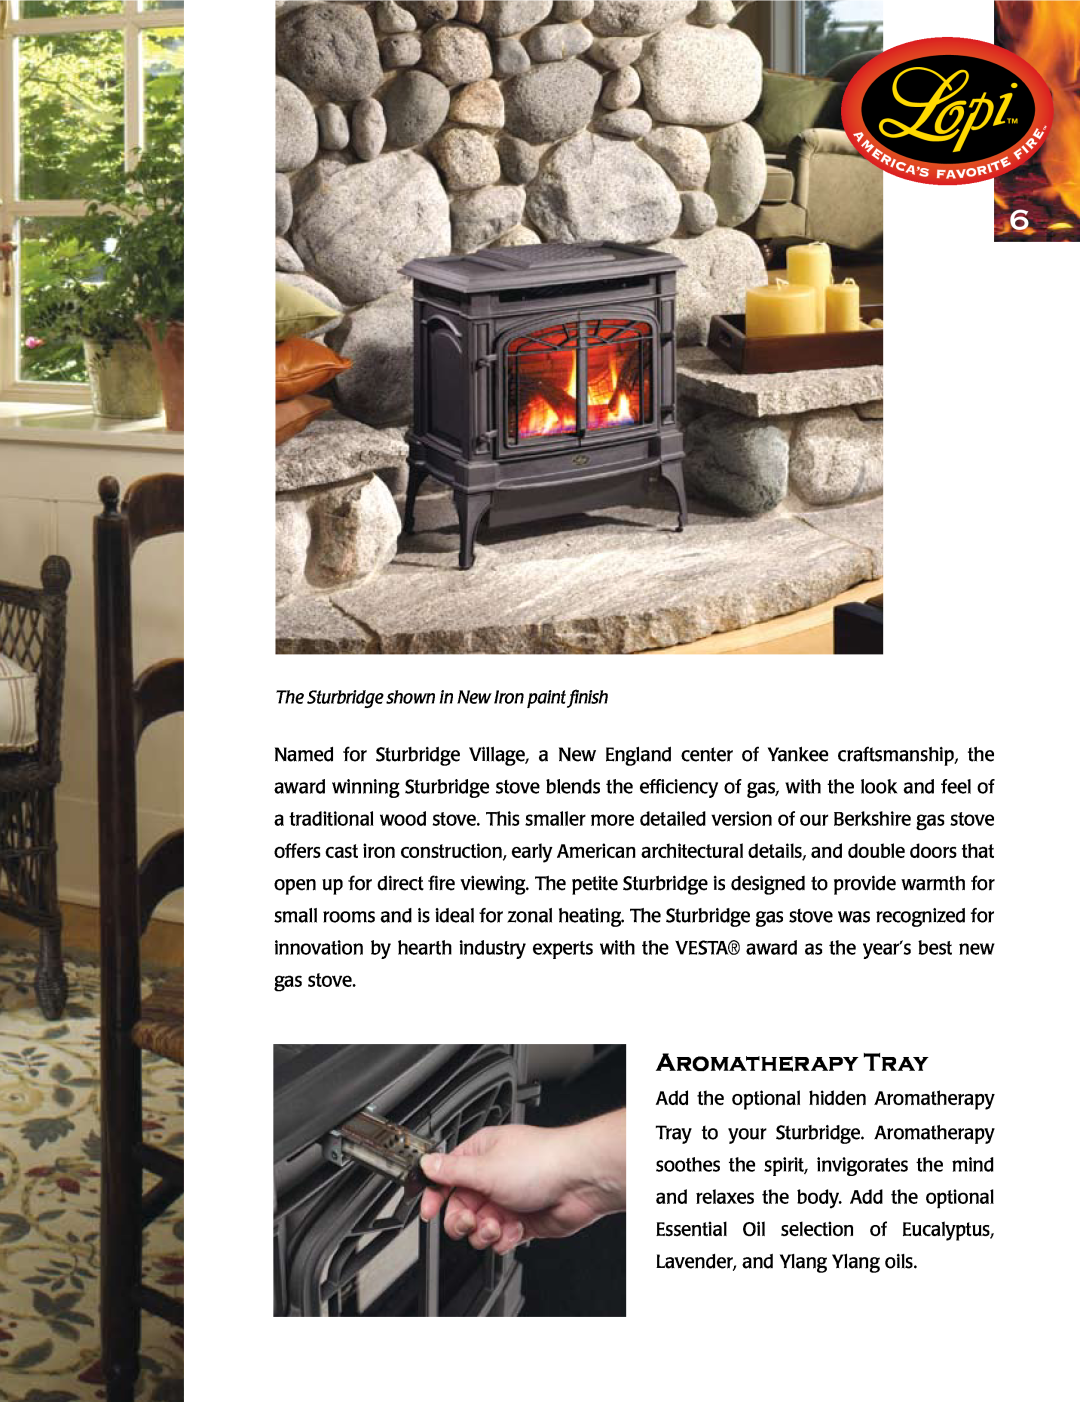 Lopi Gas Stove And Fireplace manual Aromatherapy Tray, The Sturbridge shown in New Iron paint finish 